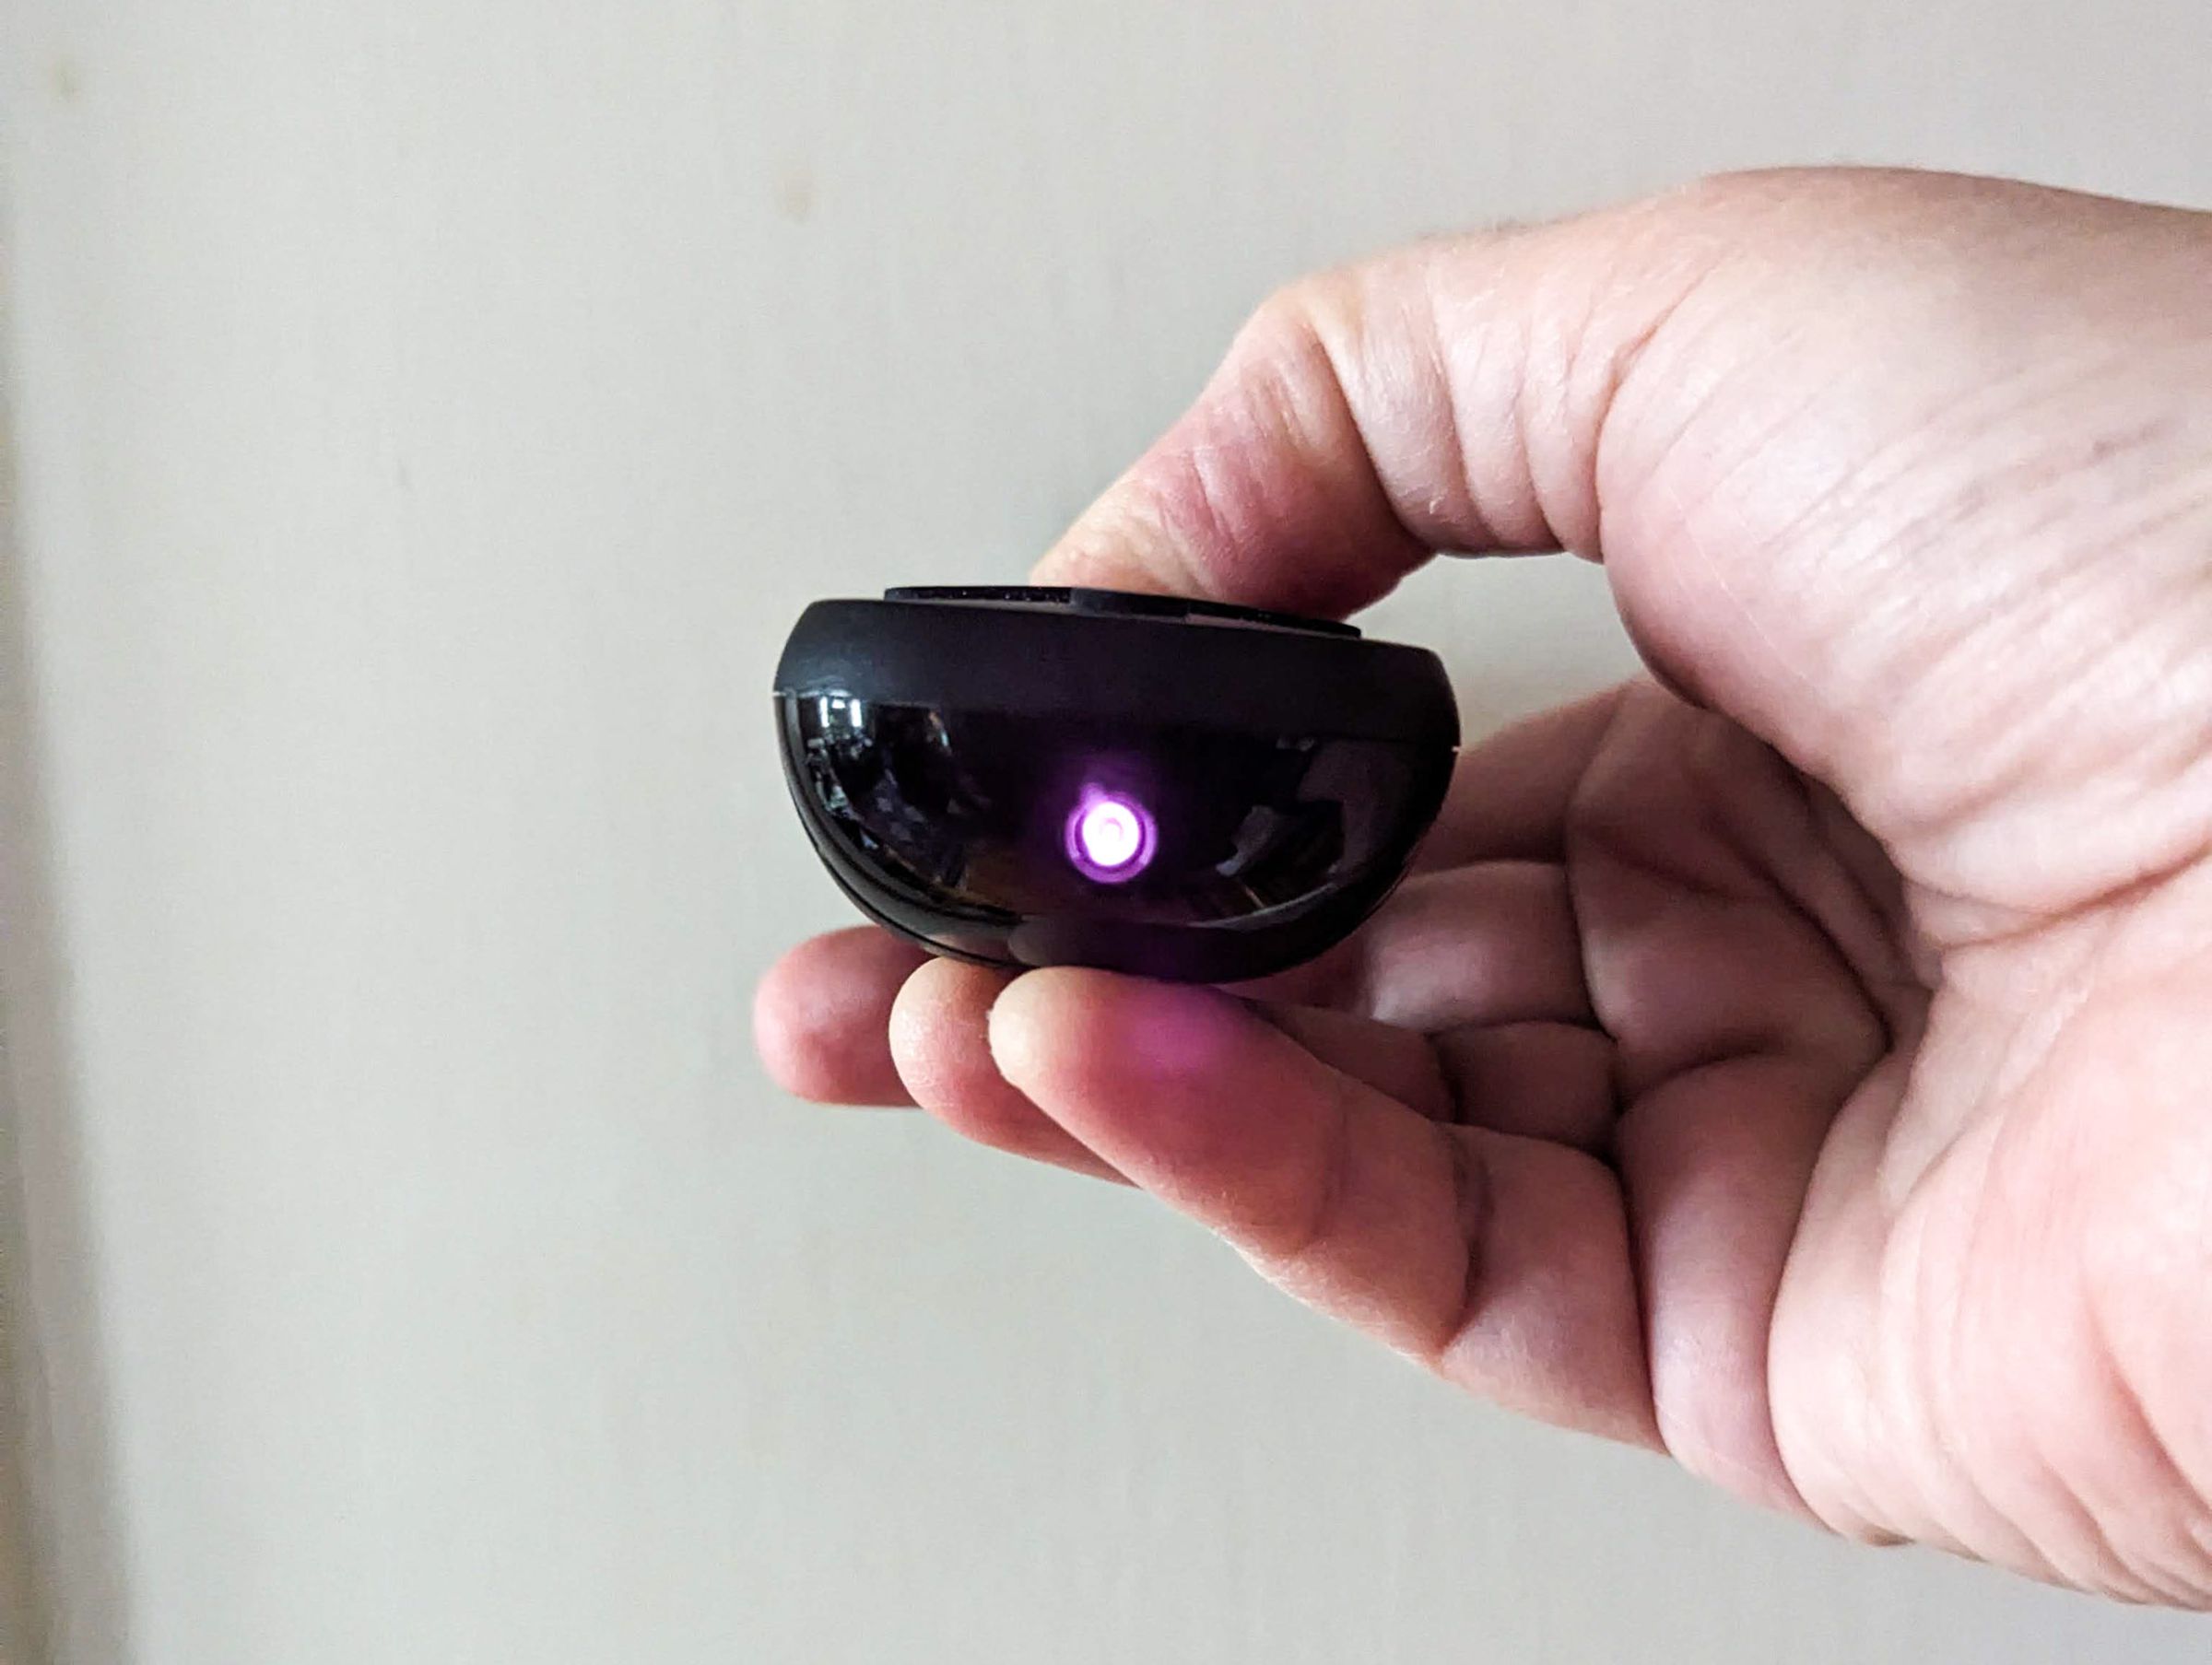 Photo of hand holding a TV remote with a small, visible pinkish light at the tip.